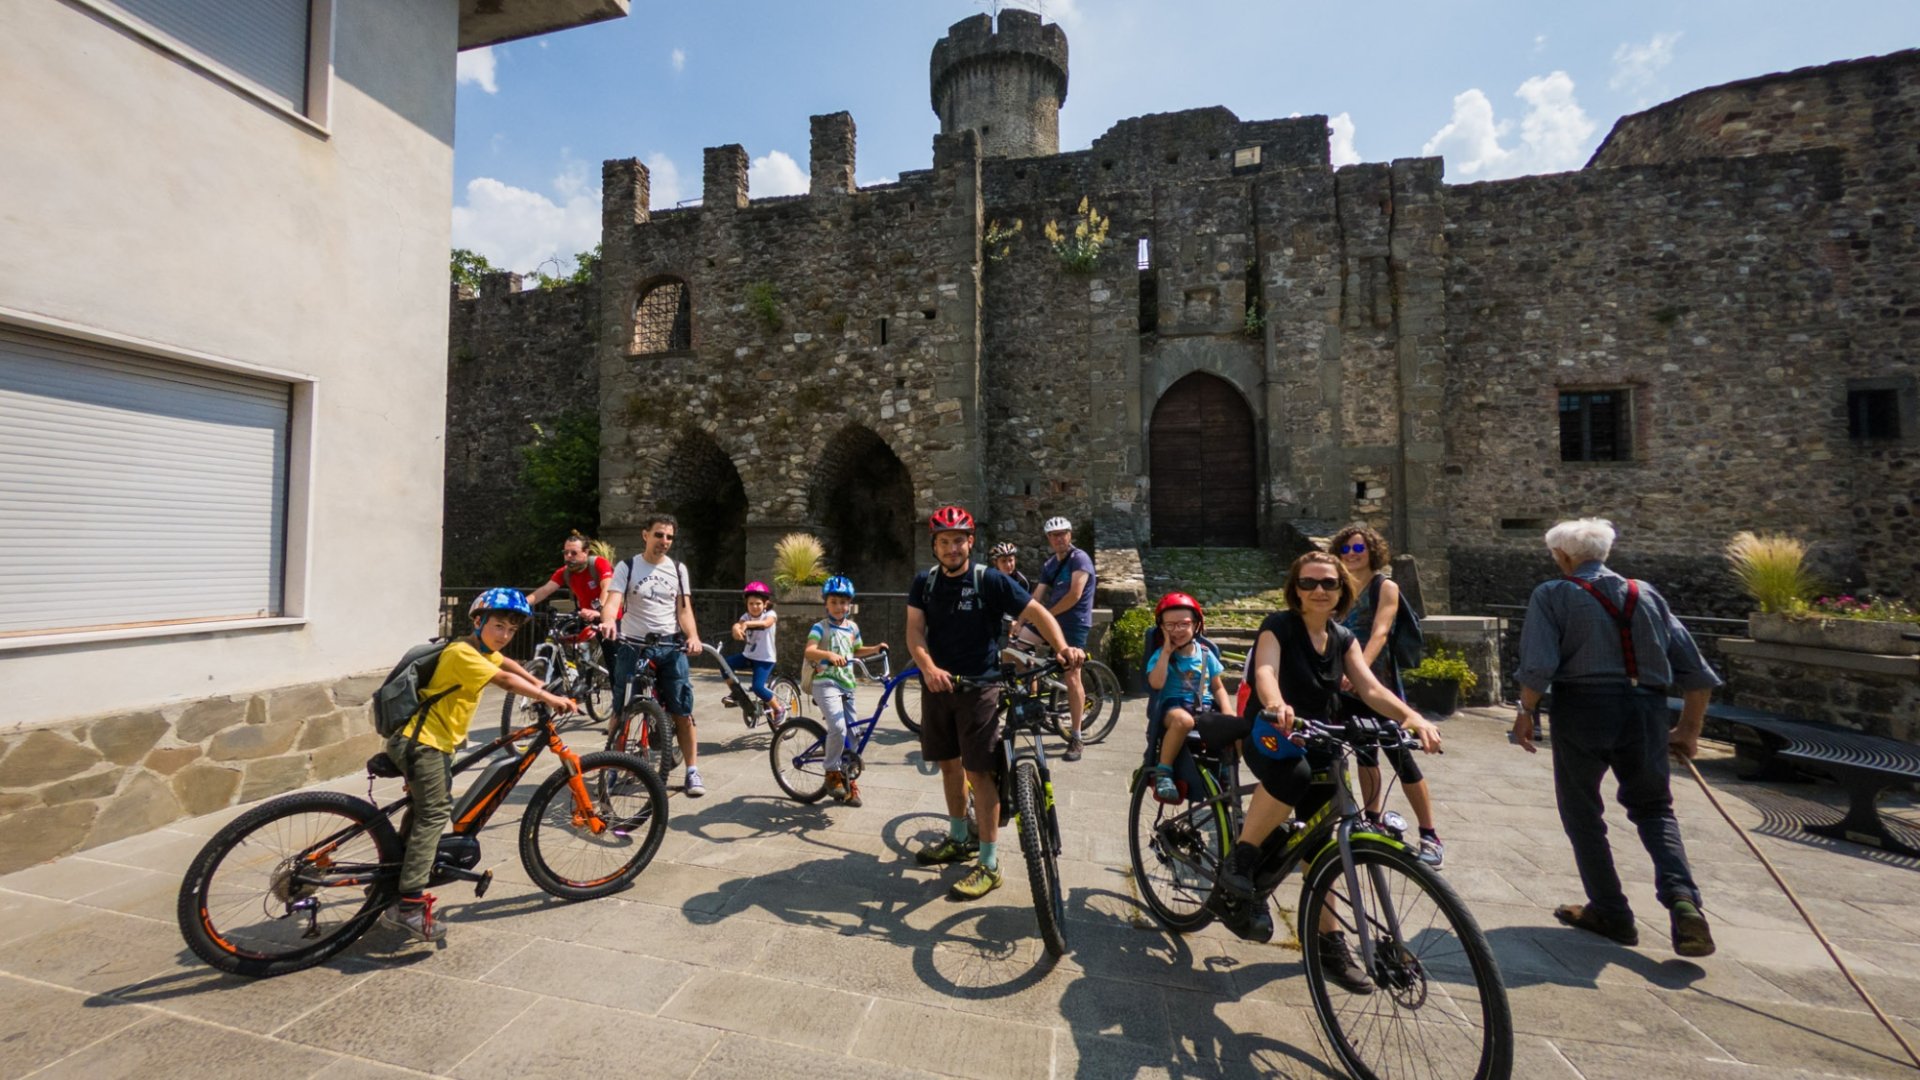 Bike tours in Lunigiana to discover villages, medieval castles and Apennine passes with beautiful views